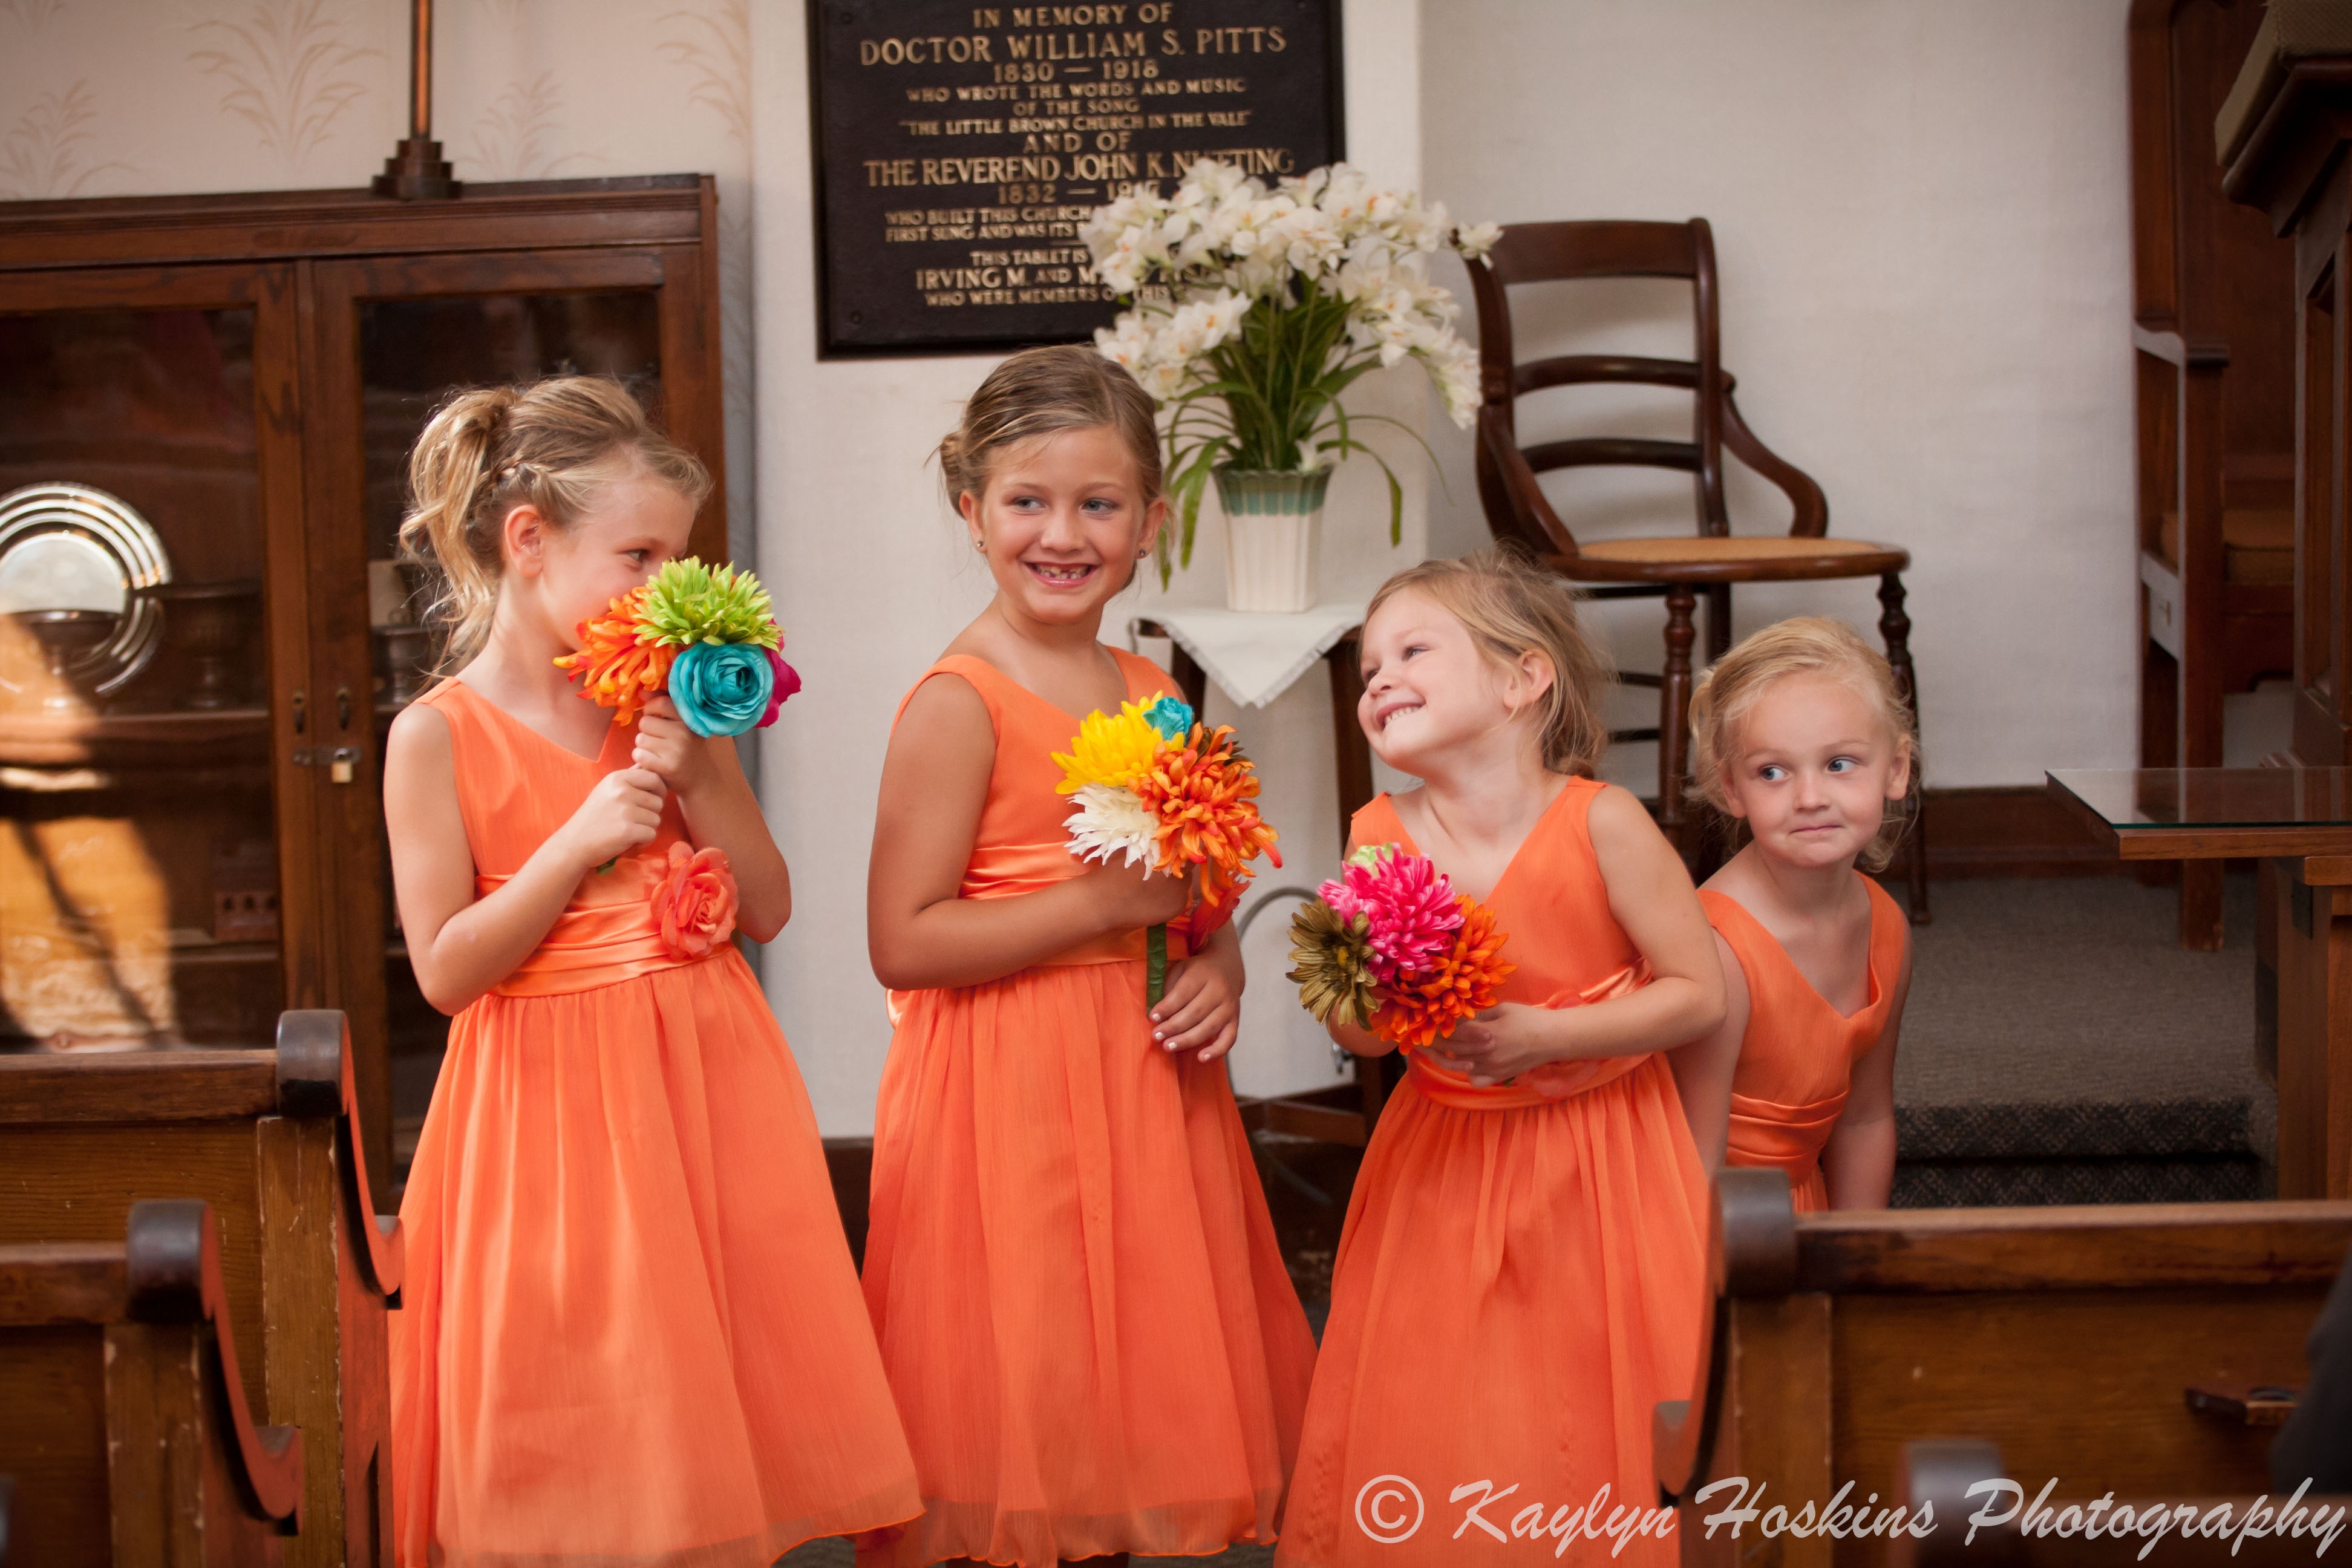 The young bridesmaids having fun during wedding ceremony at the Little Brown Church in Nashua, IA